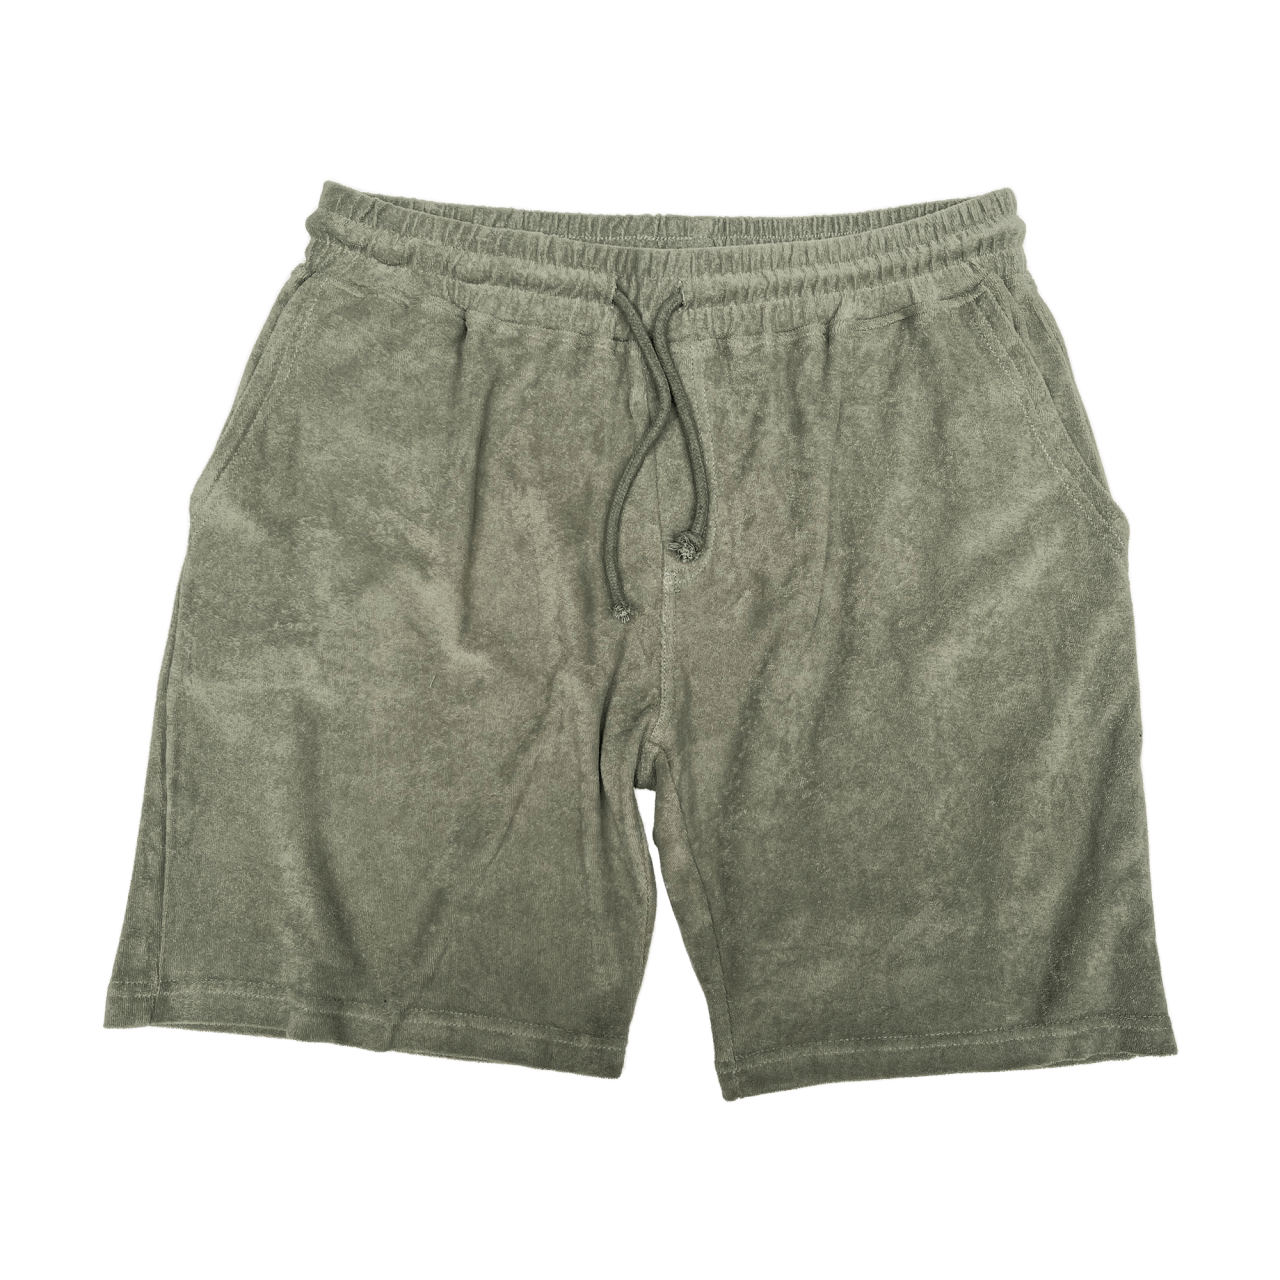 Seldom Terry Shorts - olive